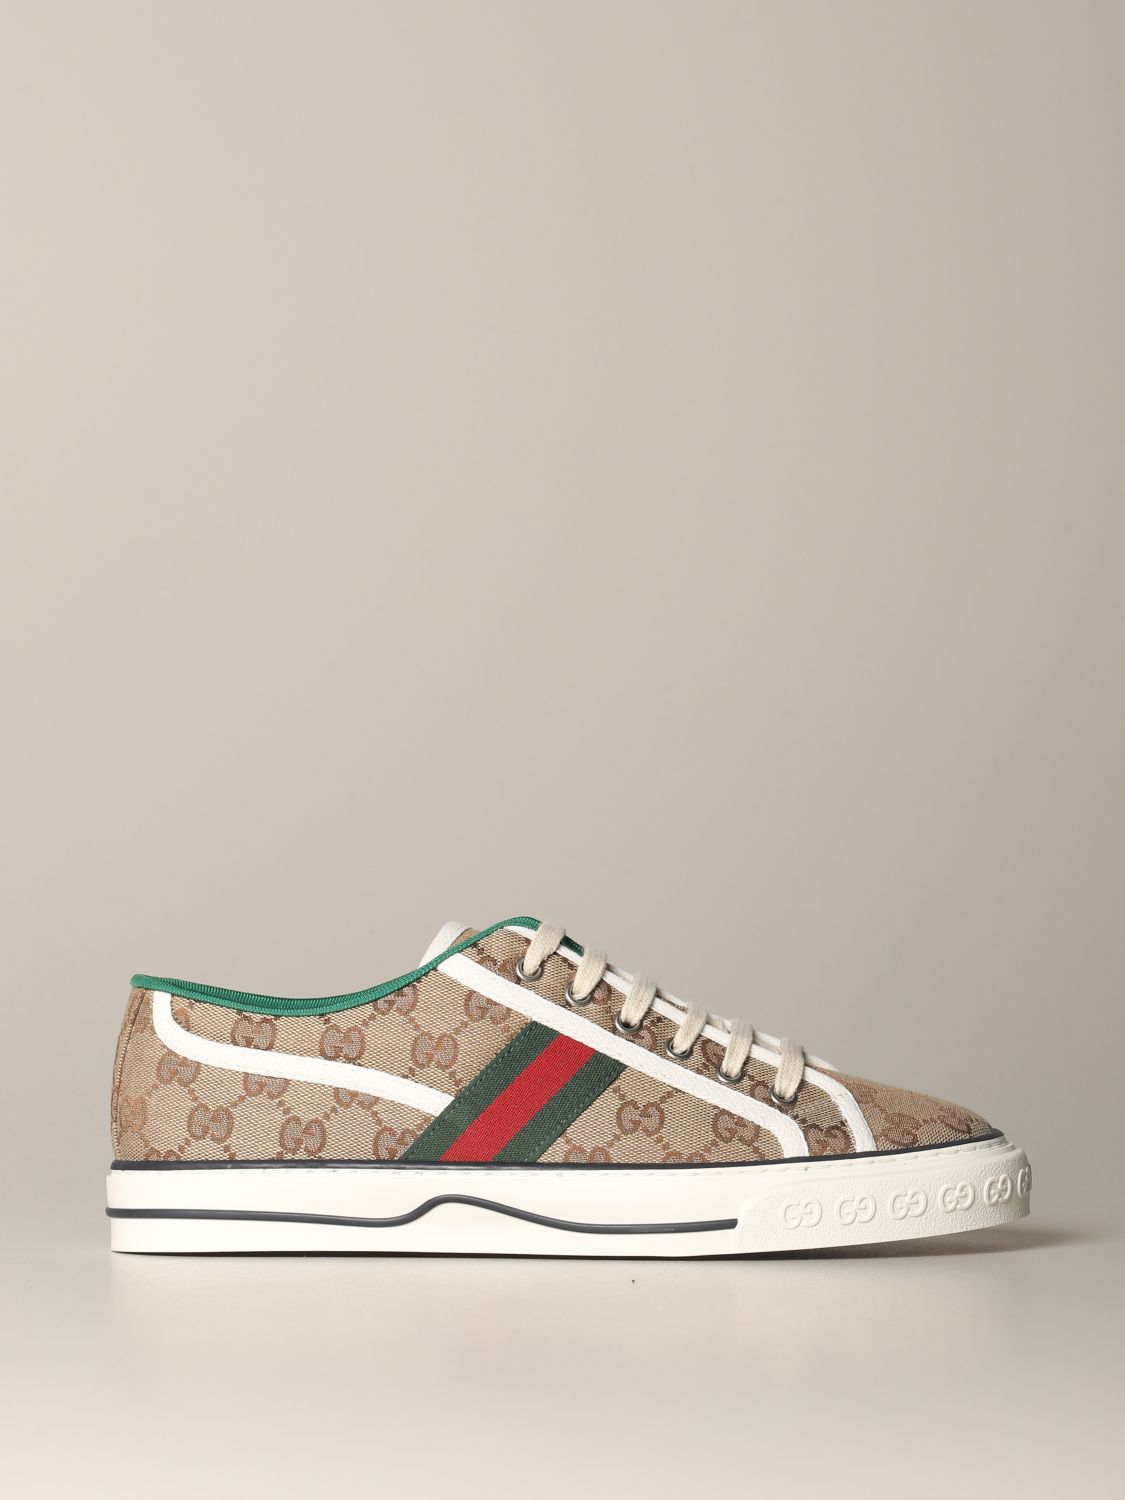 gucci inspired tennis shoes